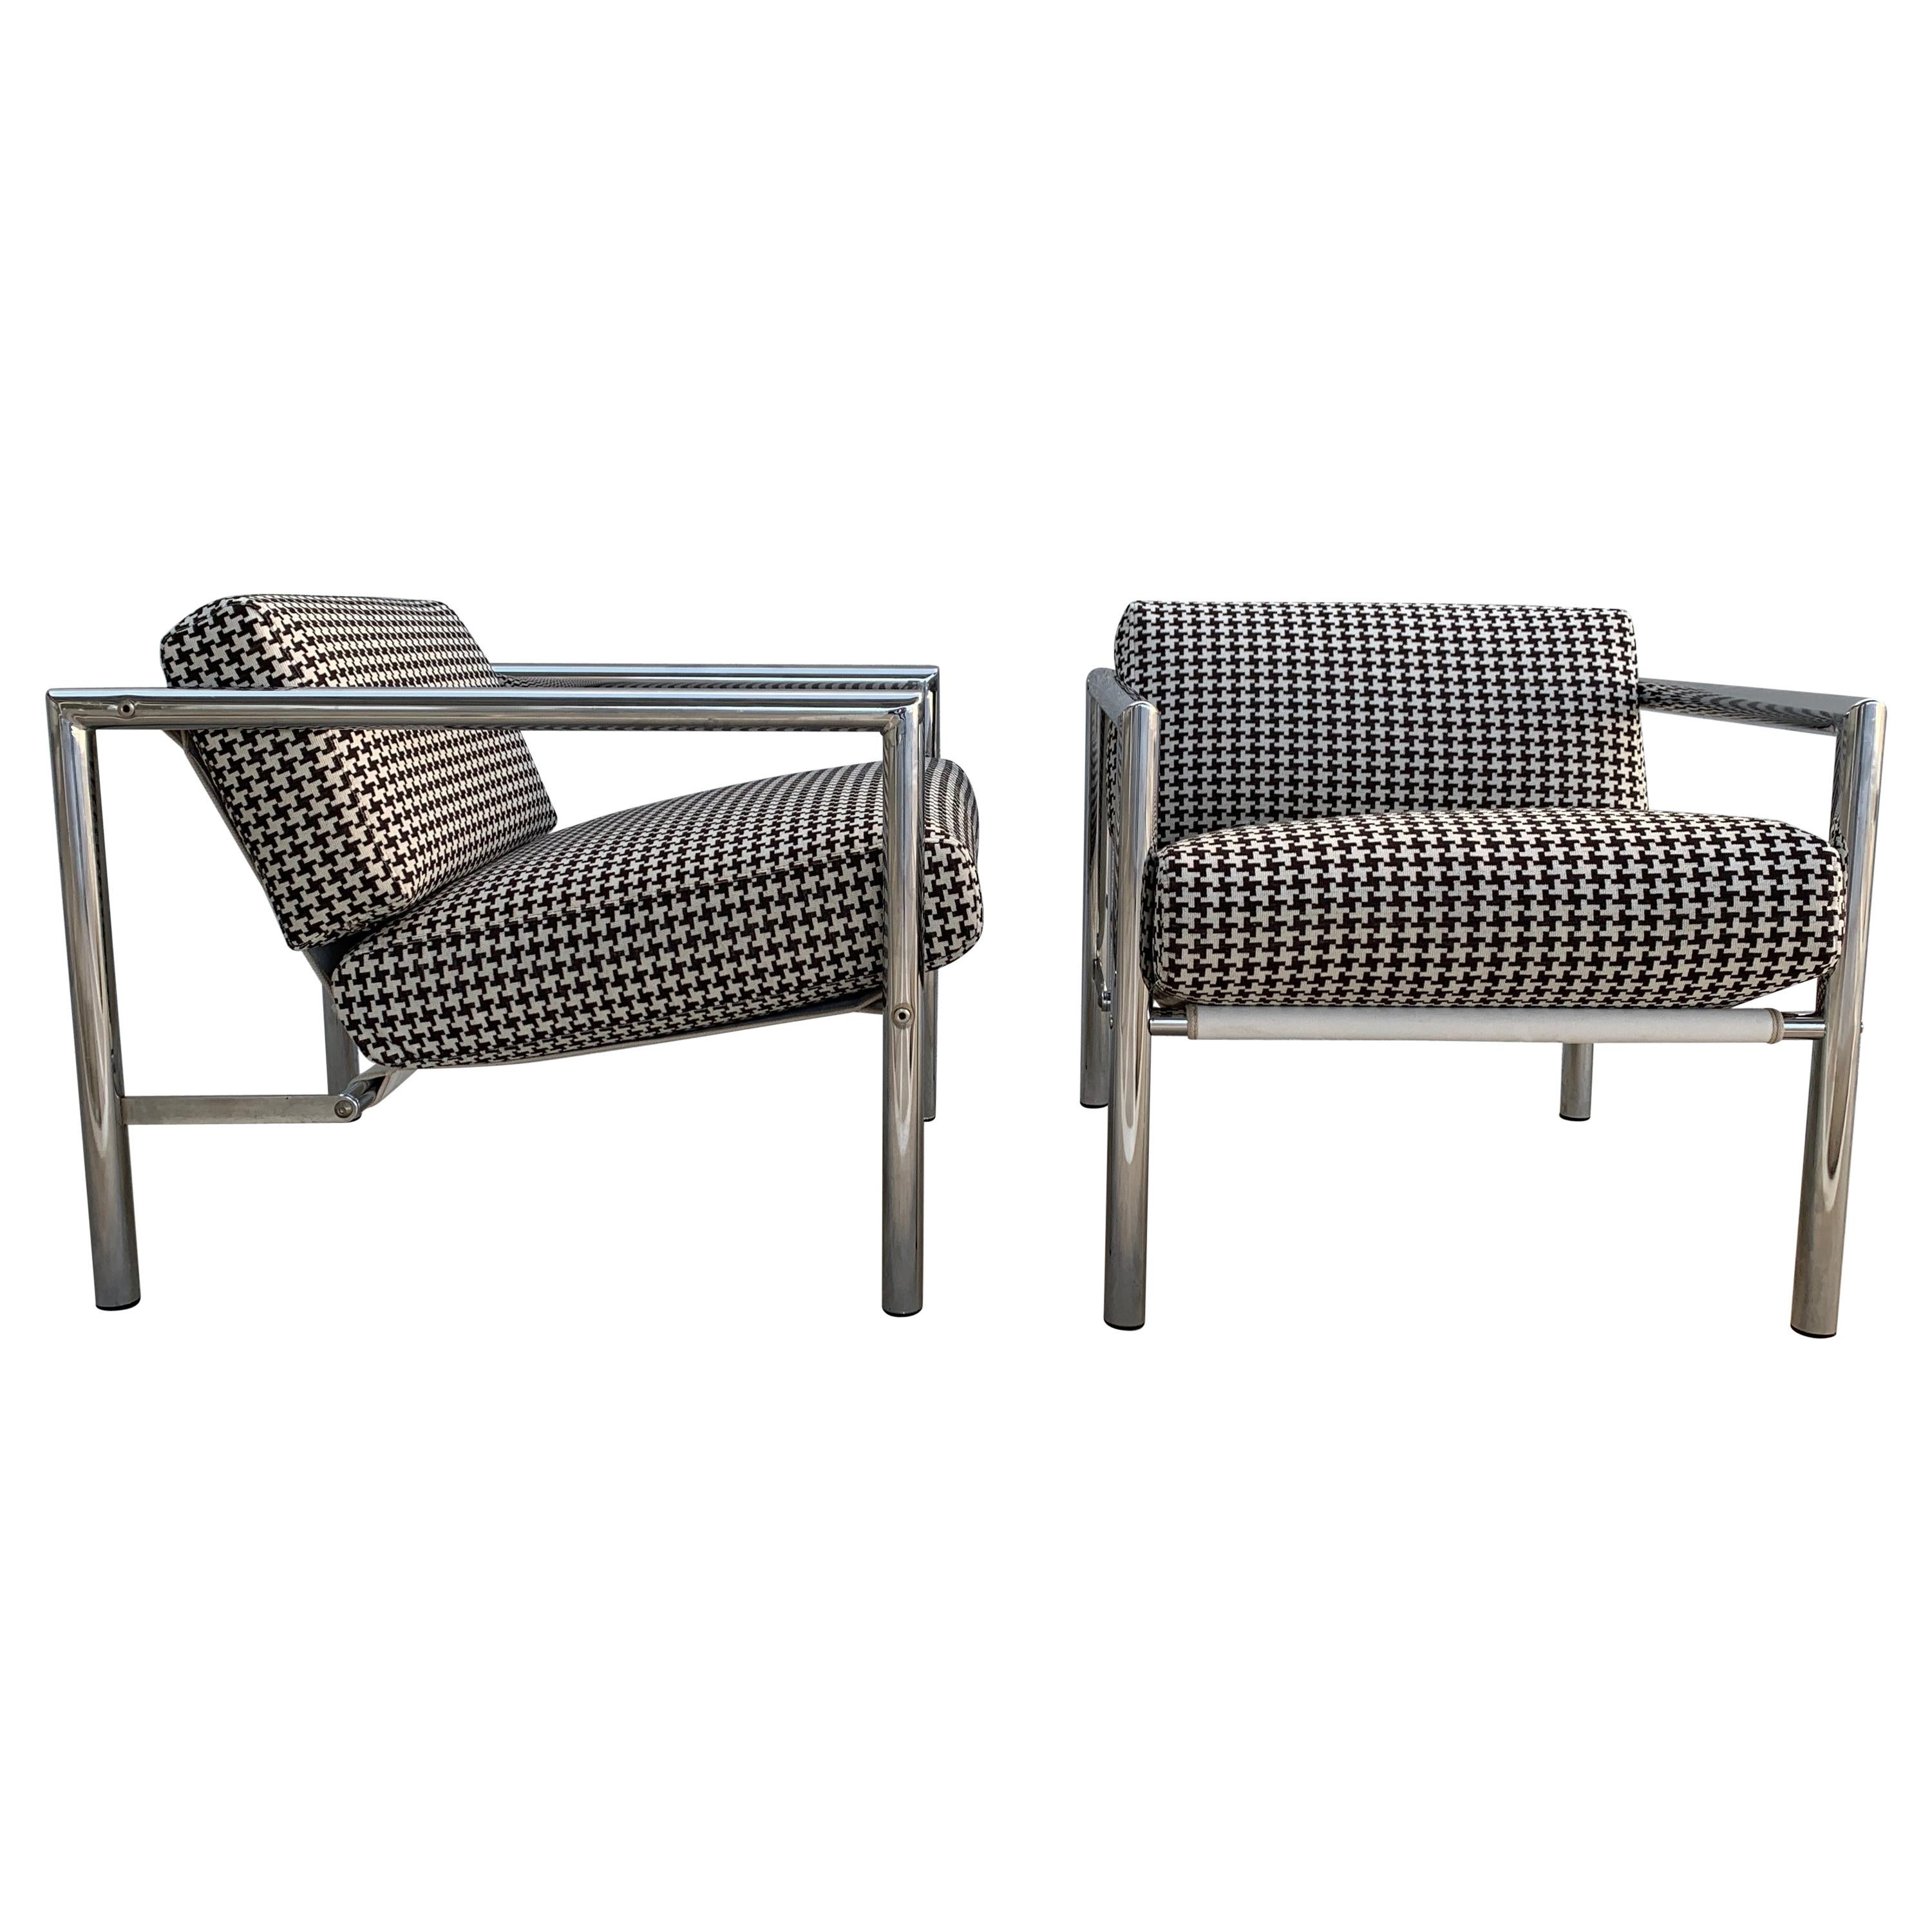 Pair of Vintage 1970s Chrome Chairs in Houndstooth